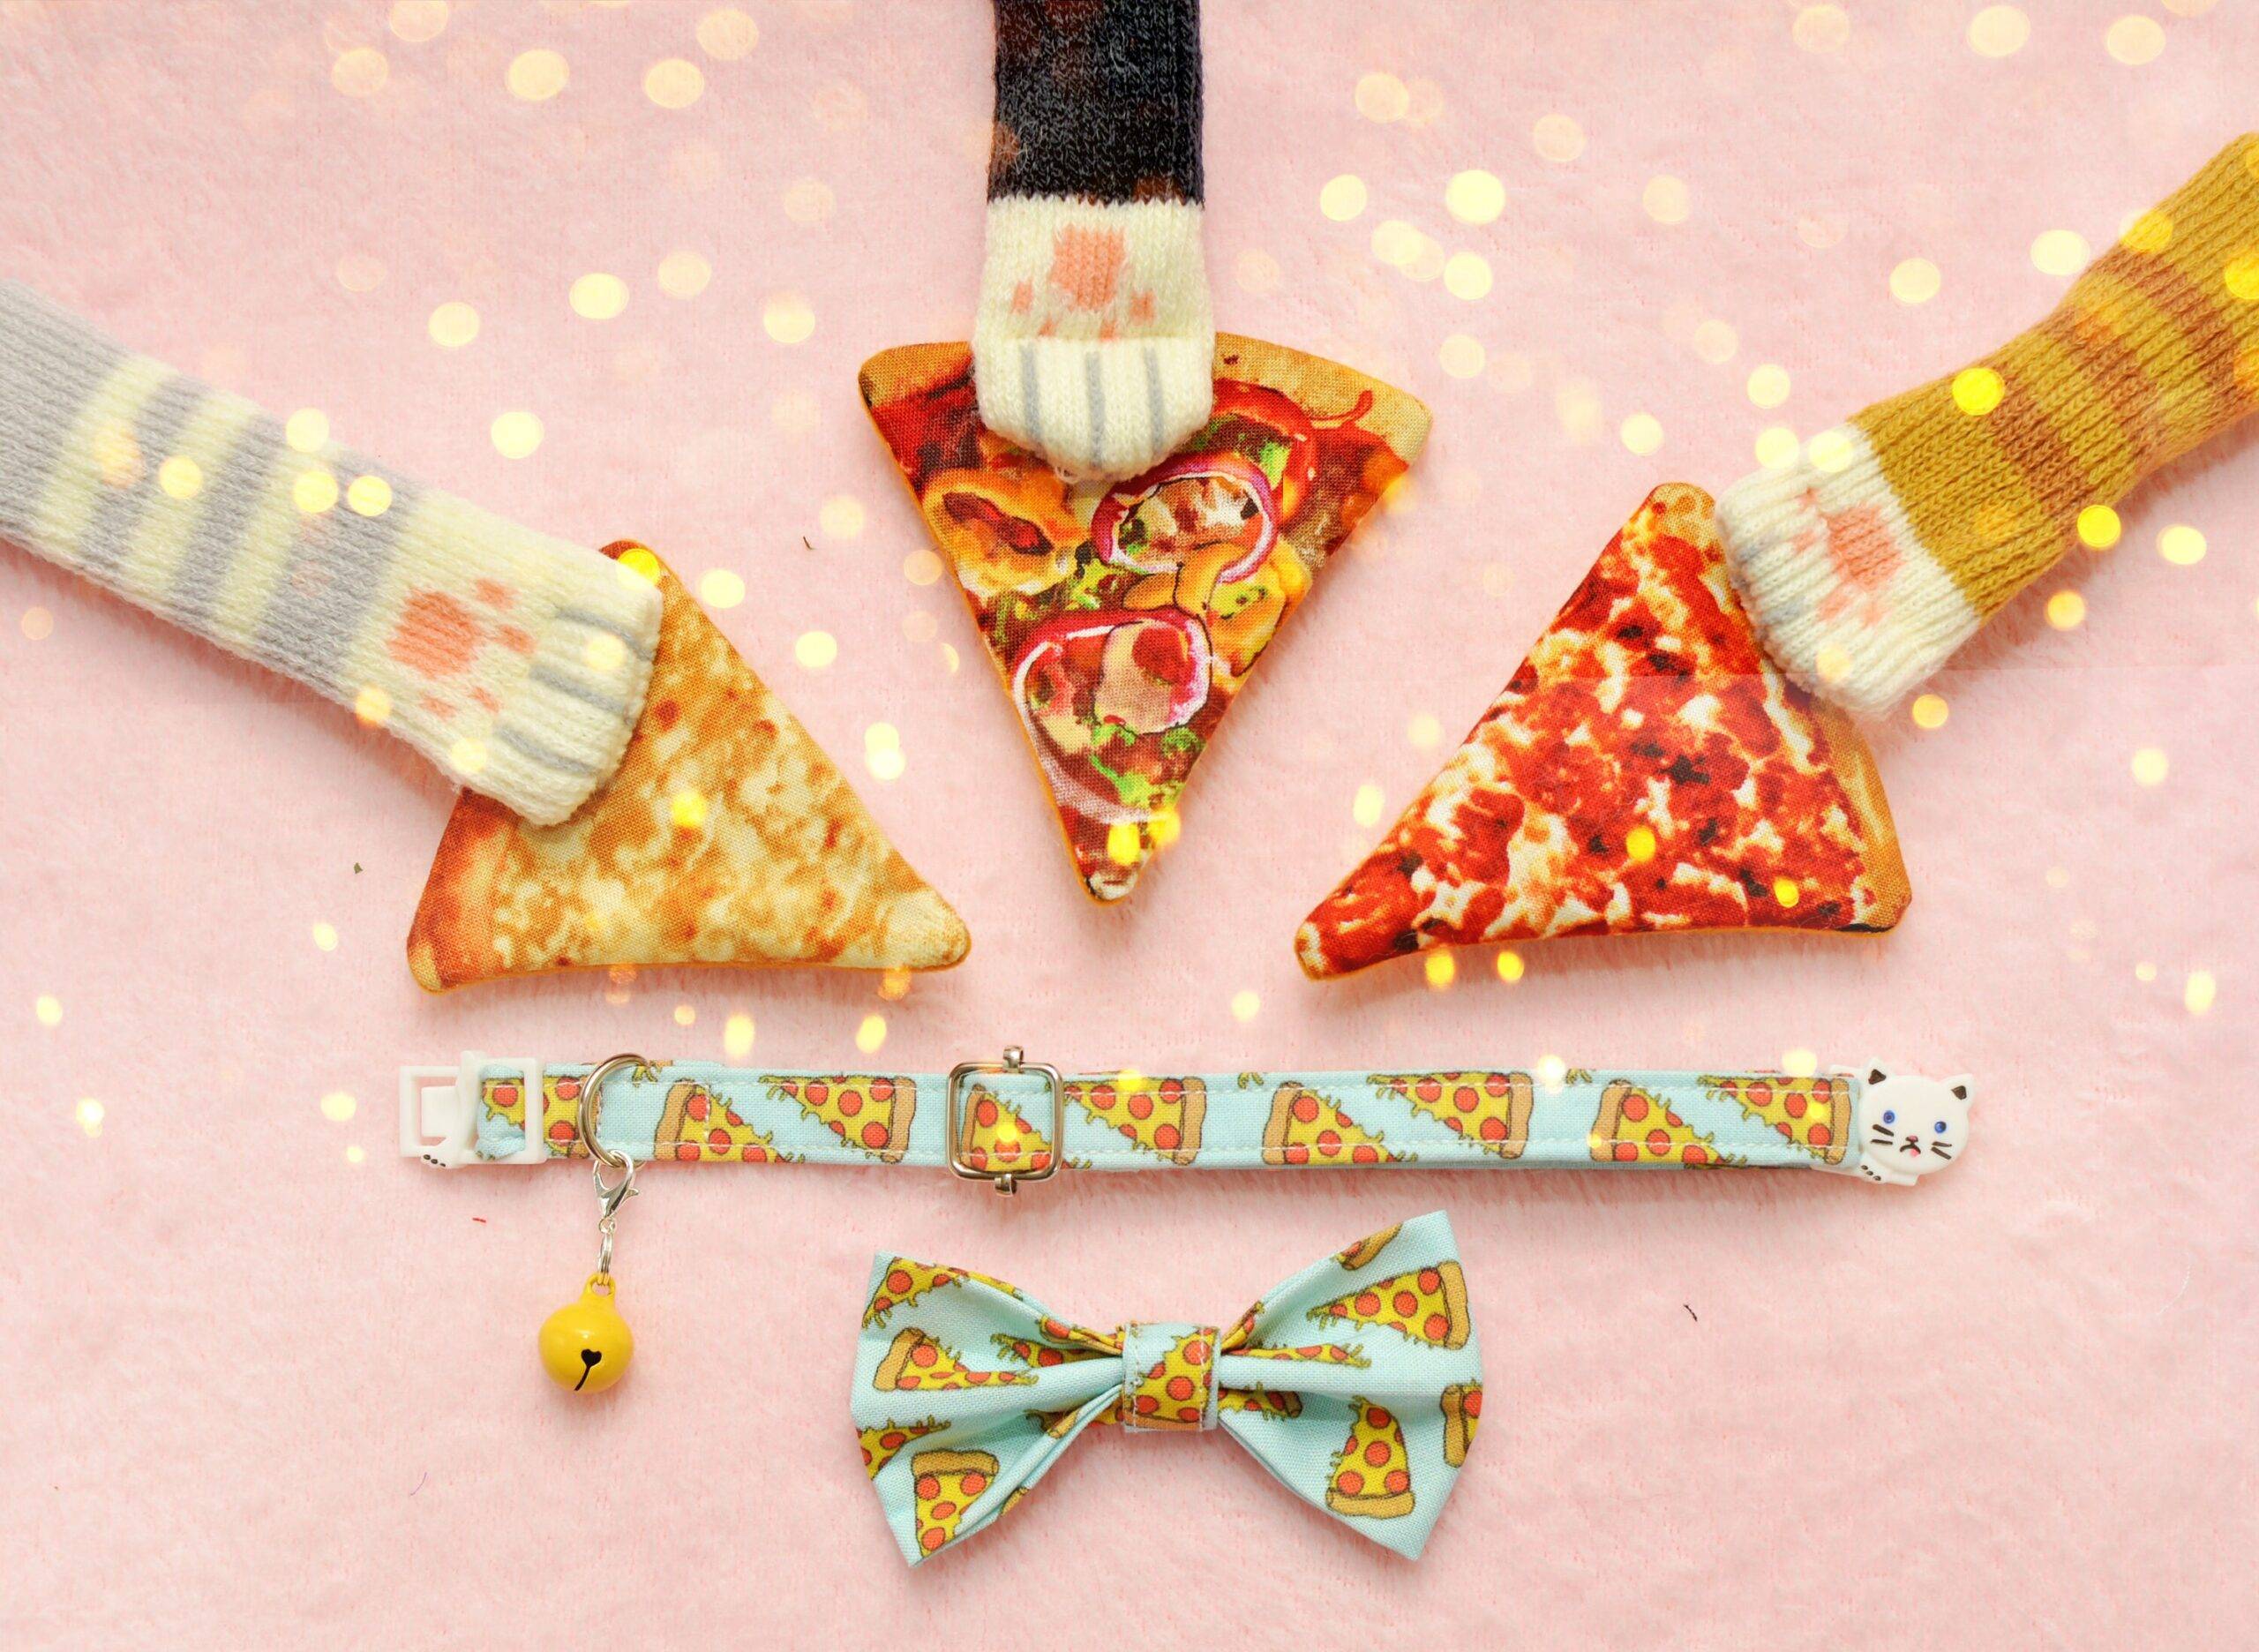 Purrfect Pizza Gift Set for Your Feline Friends: Collar, Catnip Toy, Bow, Socks, and More!